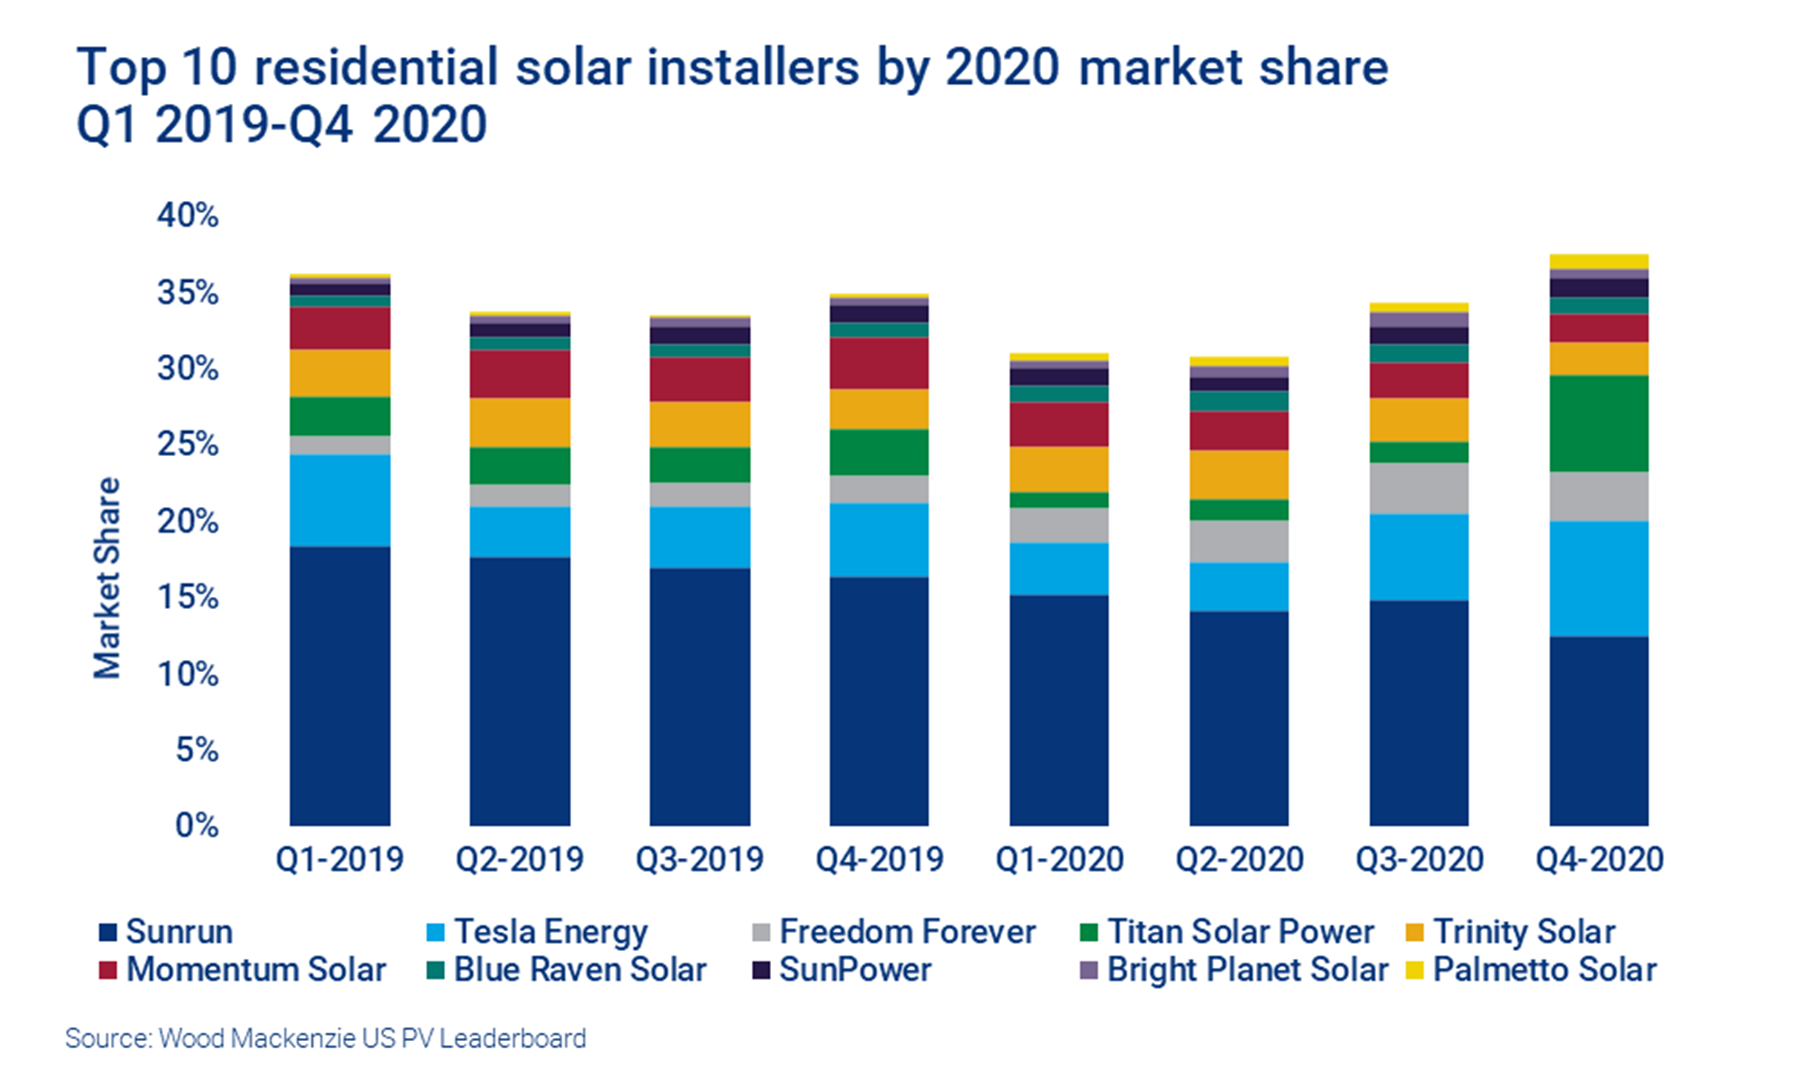 A chart showing the top 10 residential solar installers by market share from Q1 2019-Q4 2020, with Sunrun, Tesla Energy, Freedom Forever, and Titan Solar Power with the vast majority of market share.